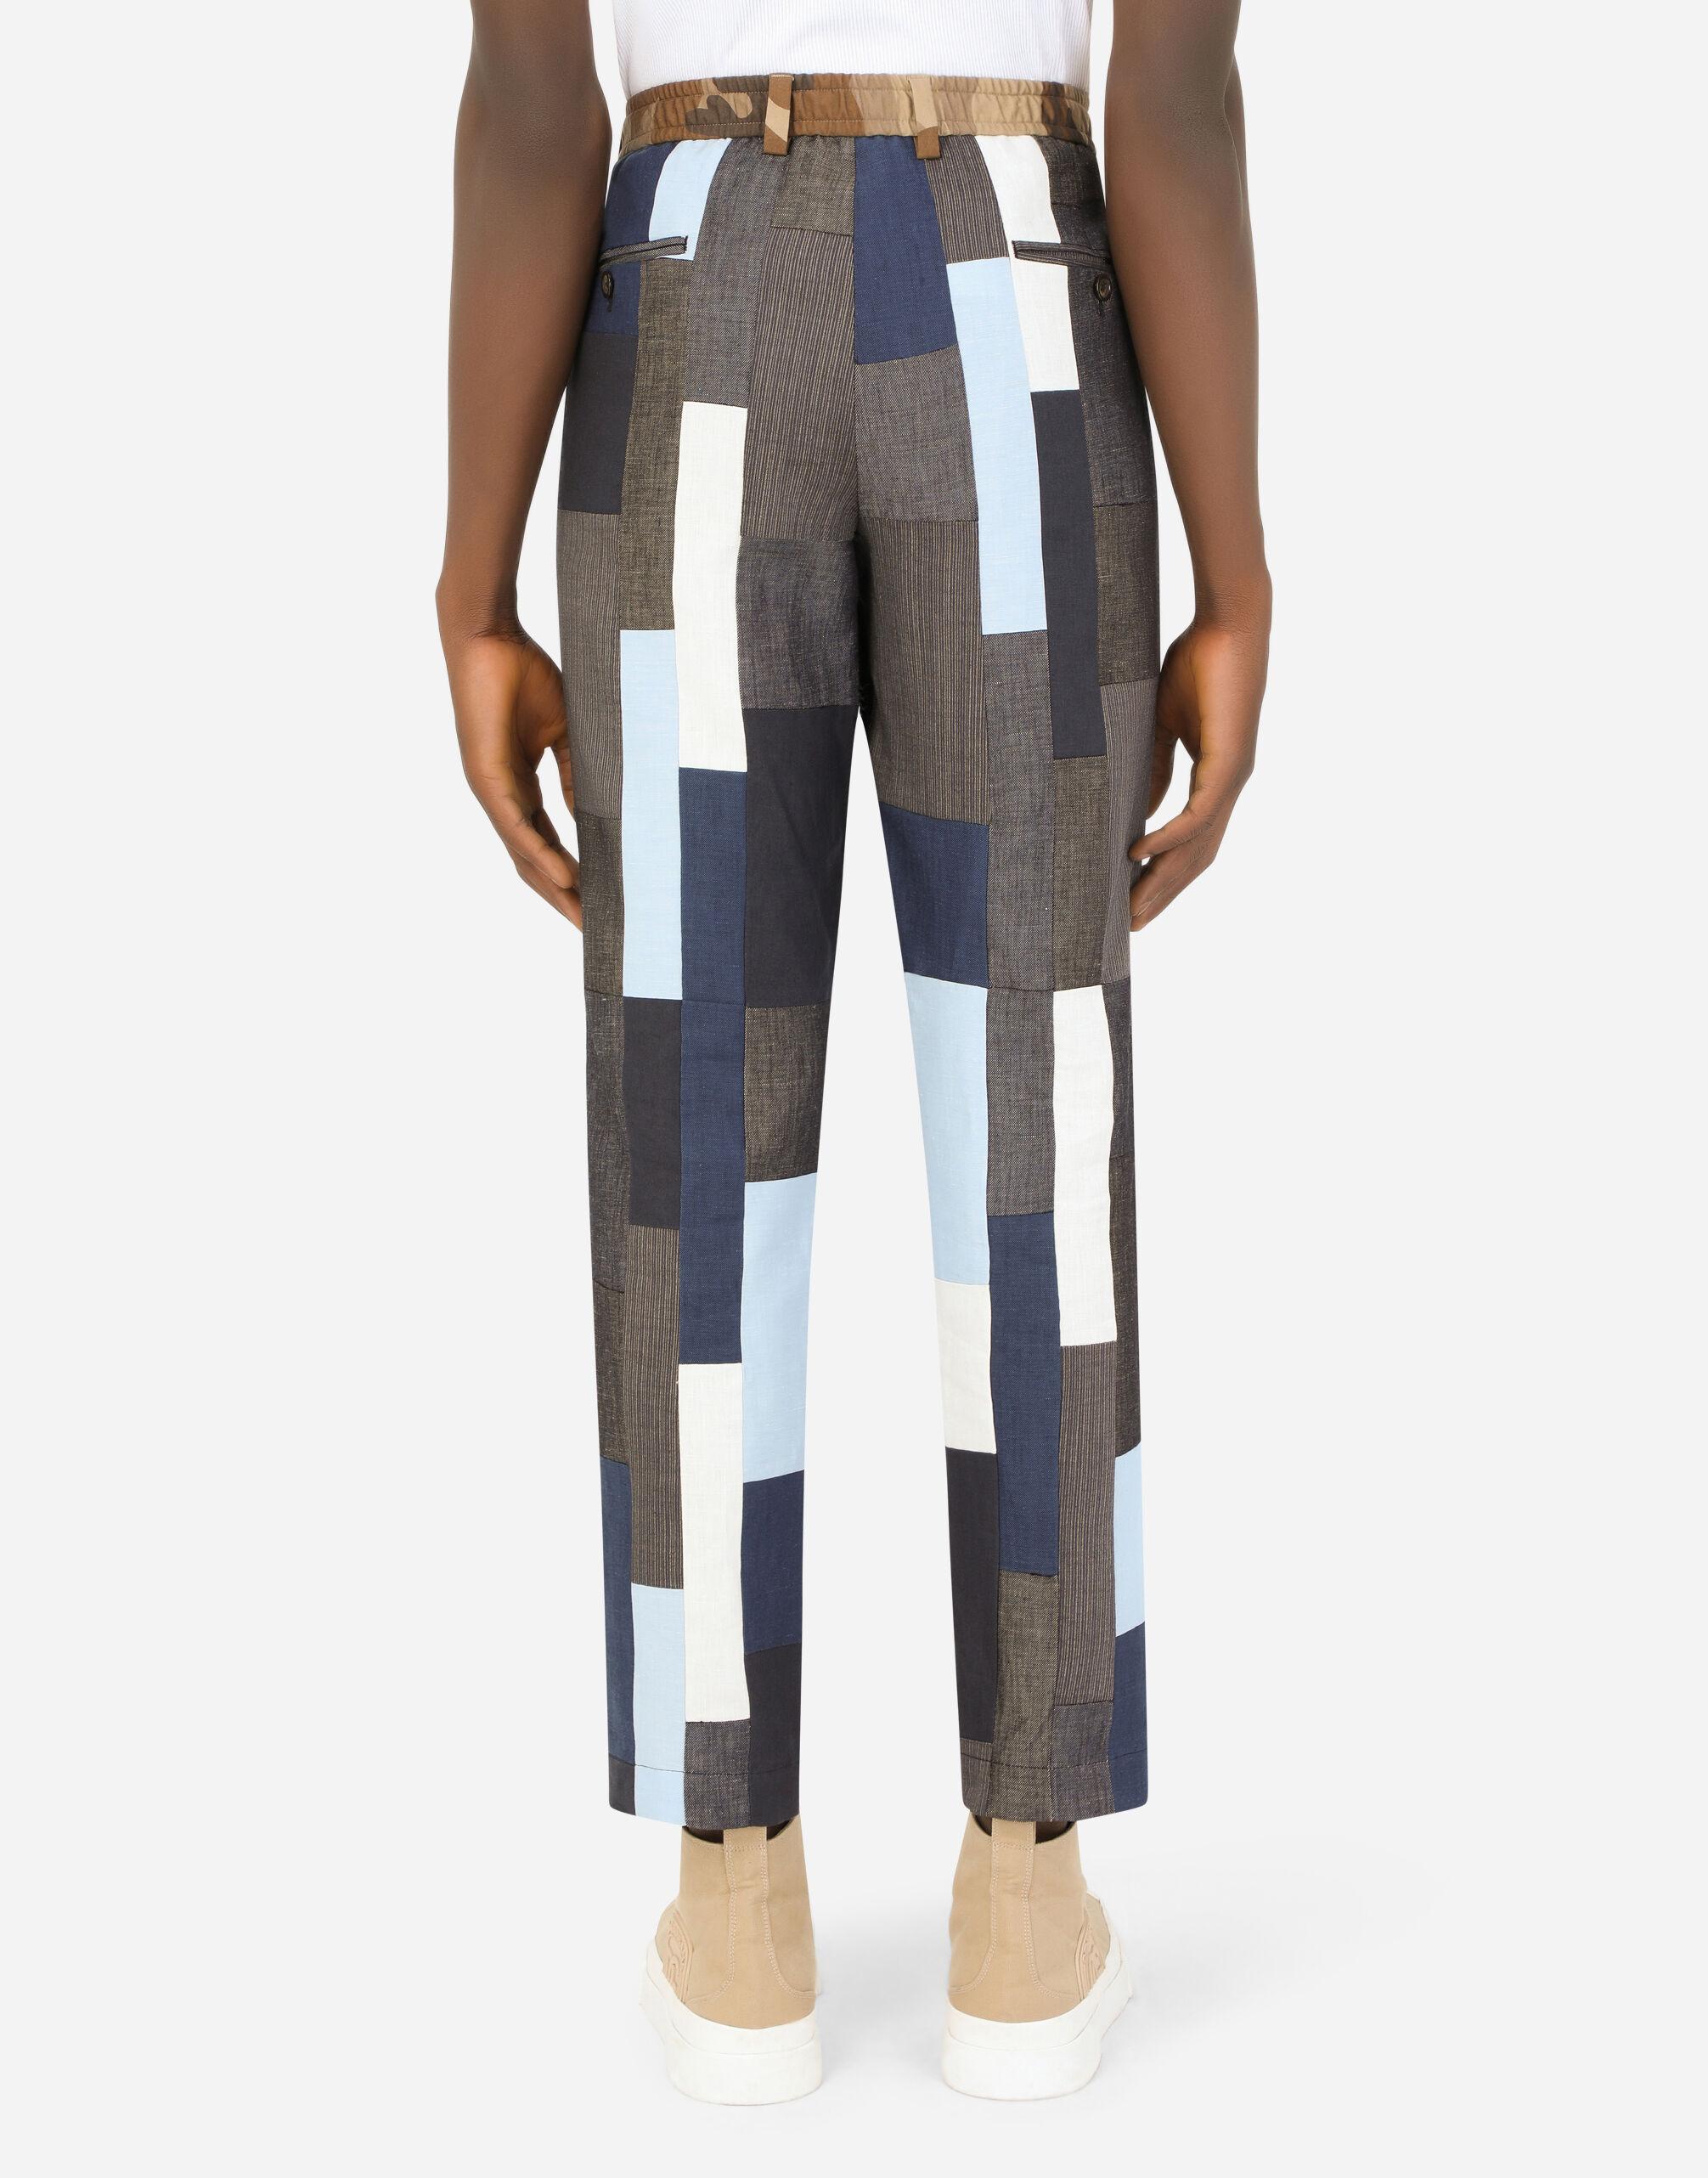 Dolce & Gabbana Cotton And Linen Patchwork Pants in Blue for Men 